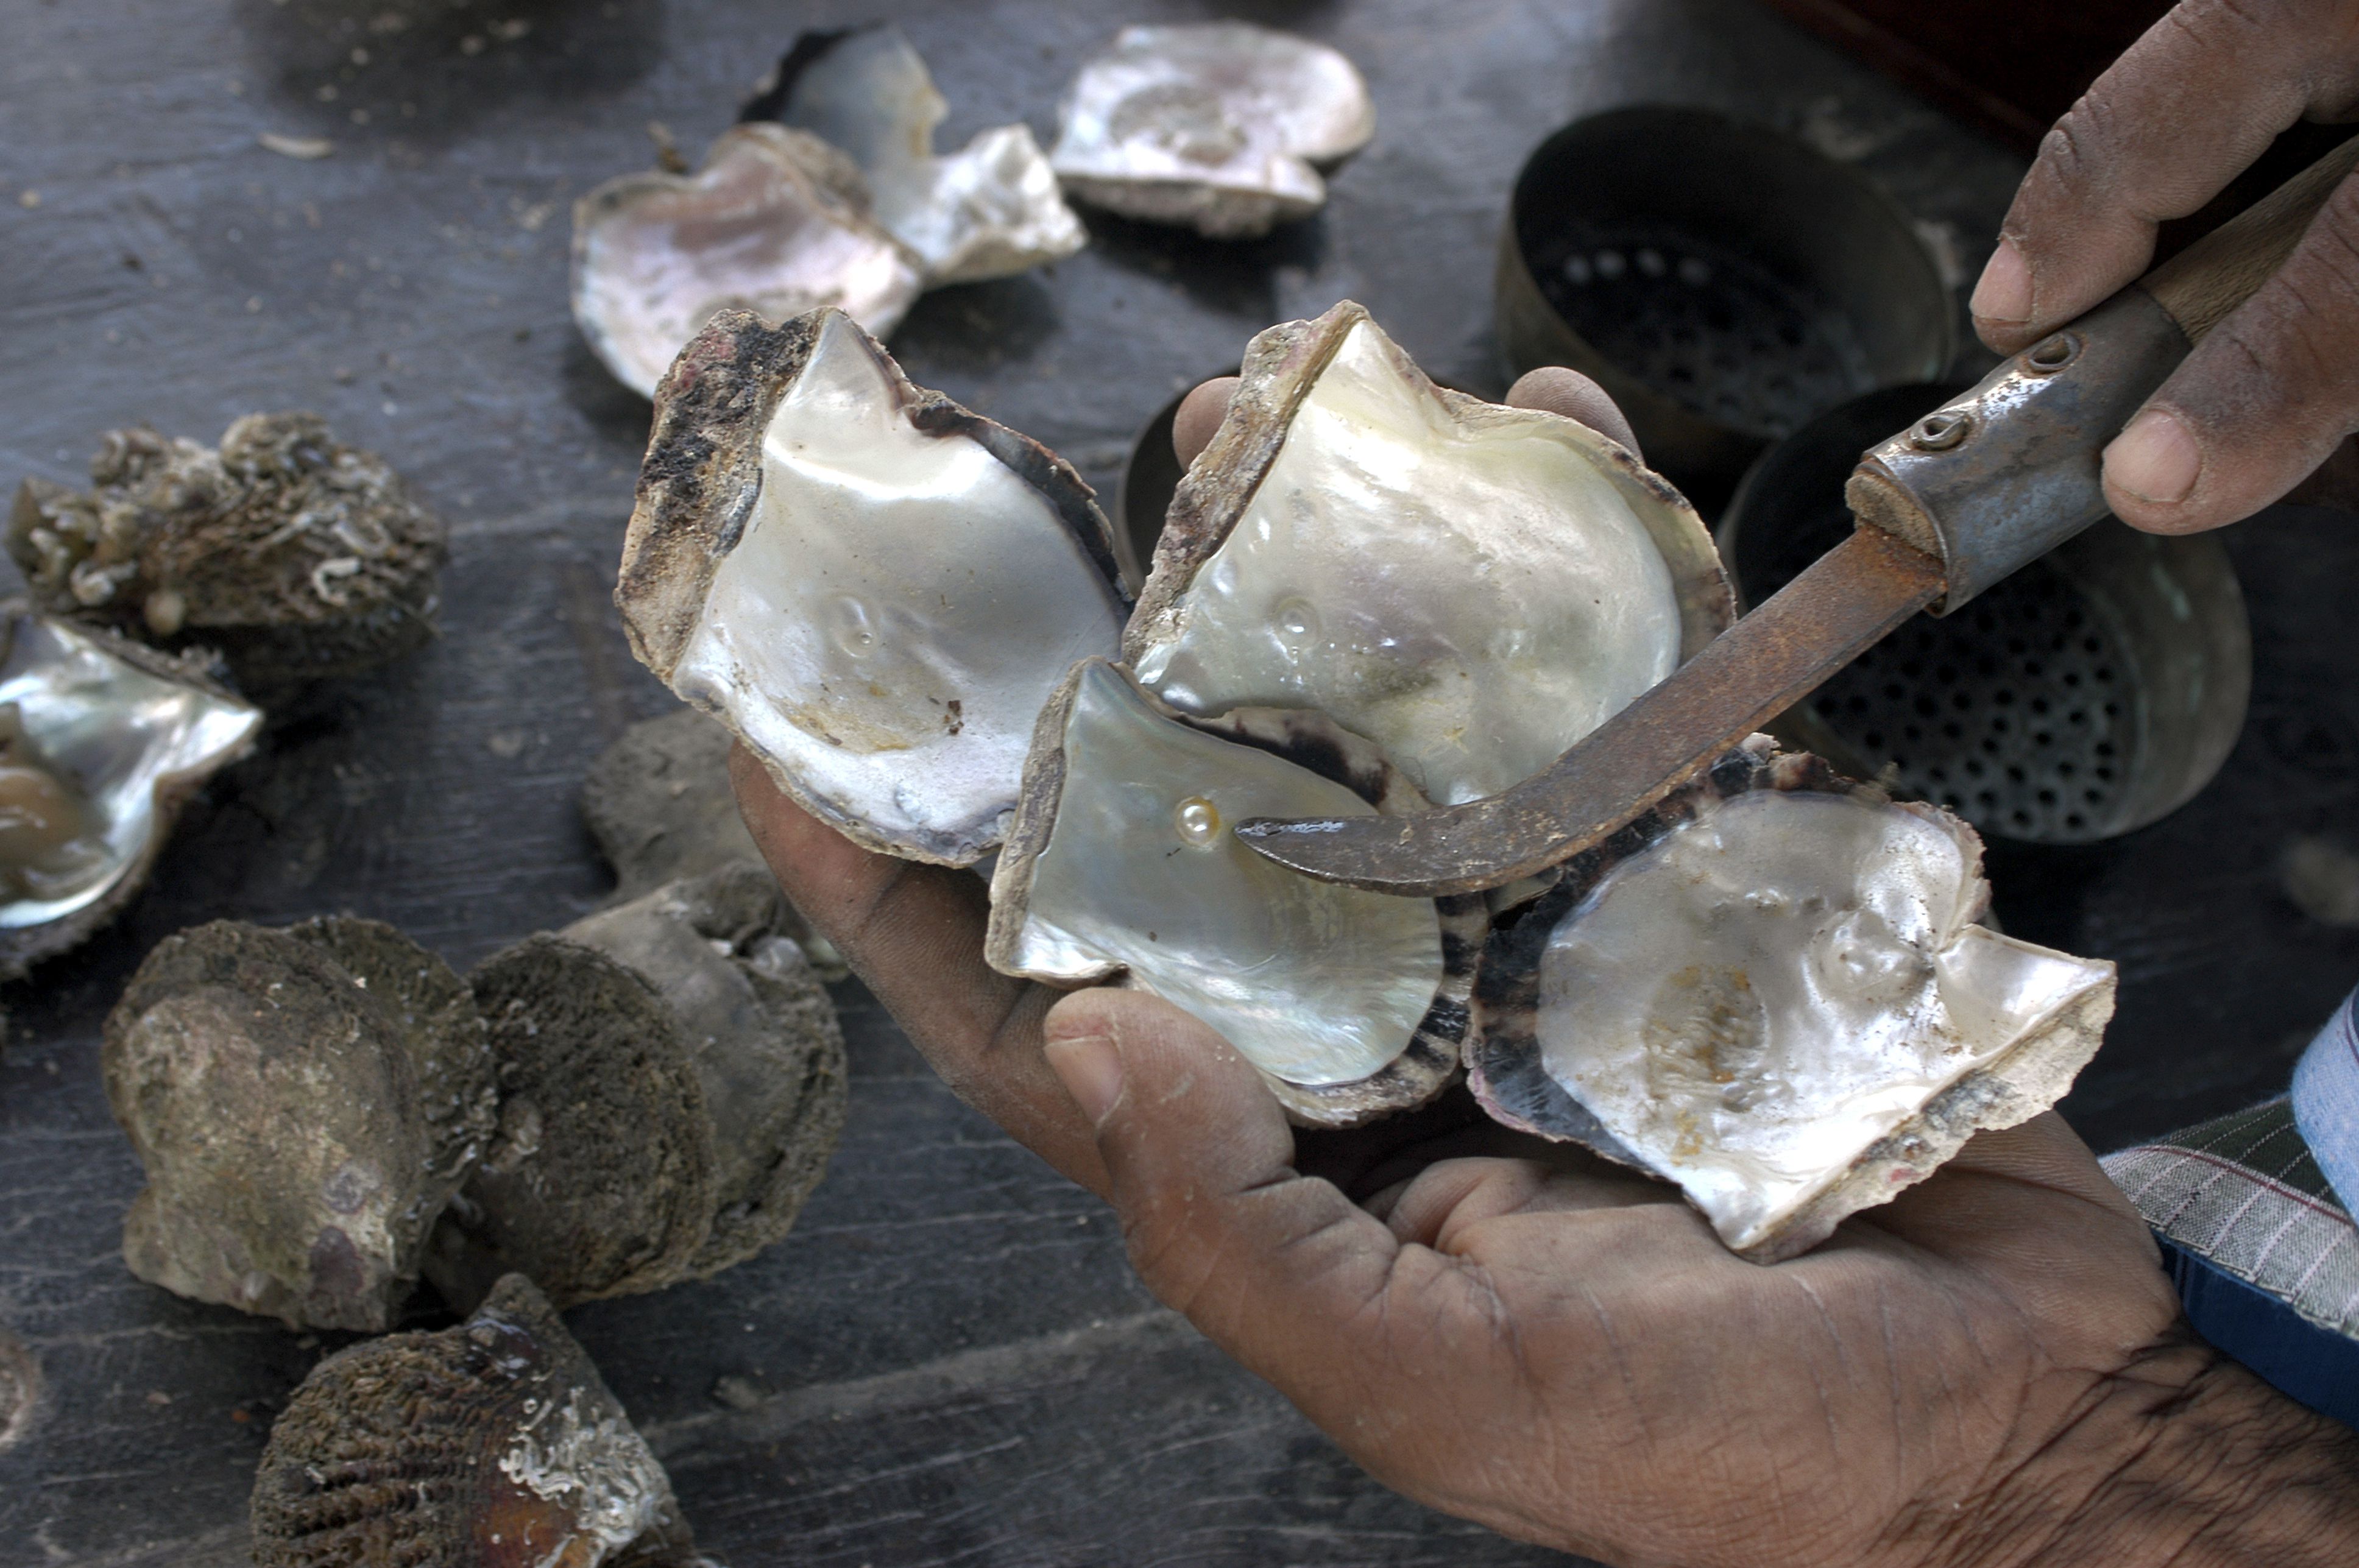 Dubai’s history of pearl diving is seeing a revival